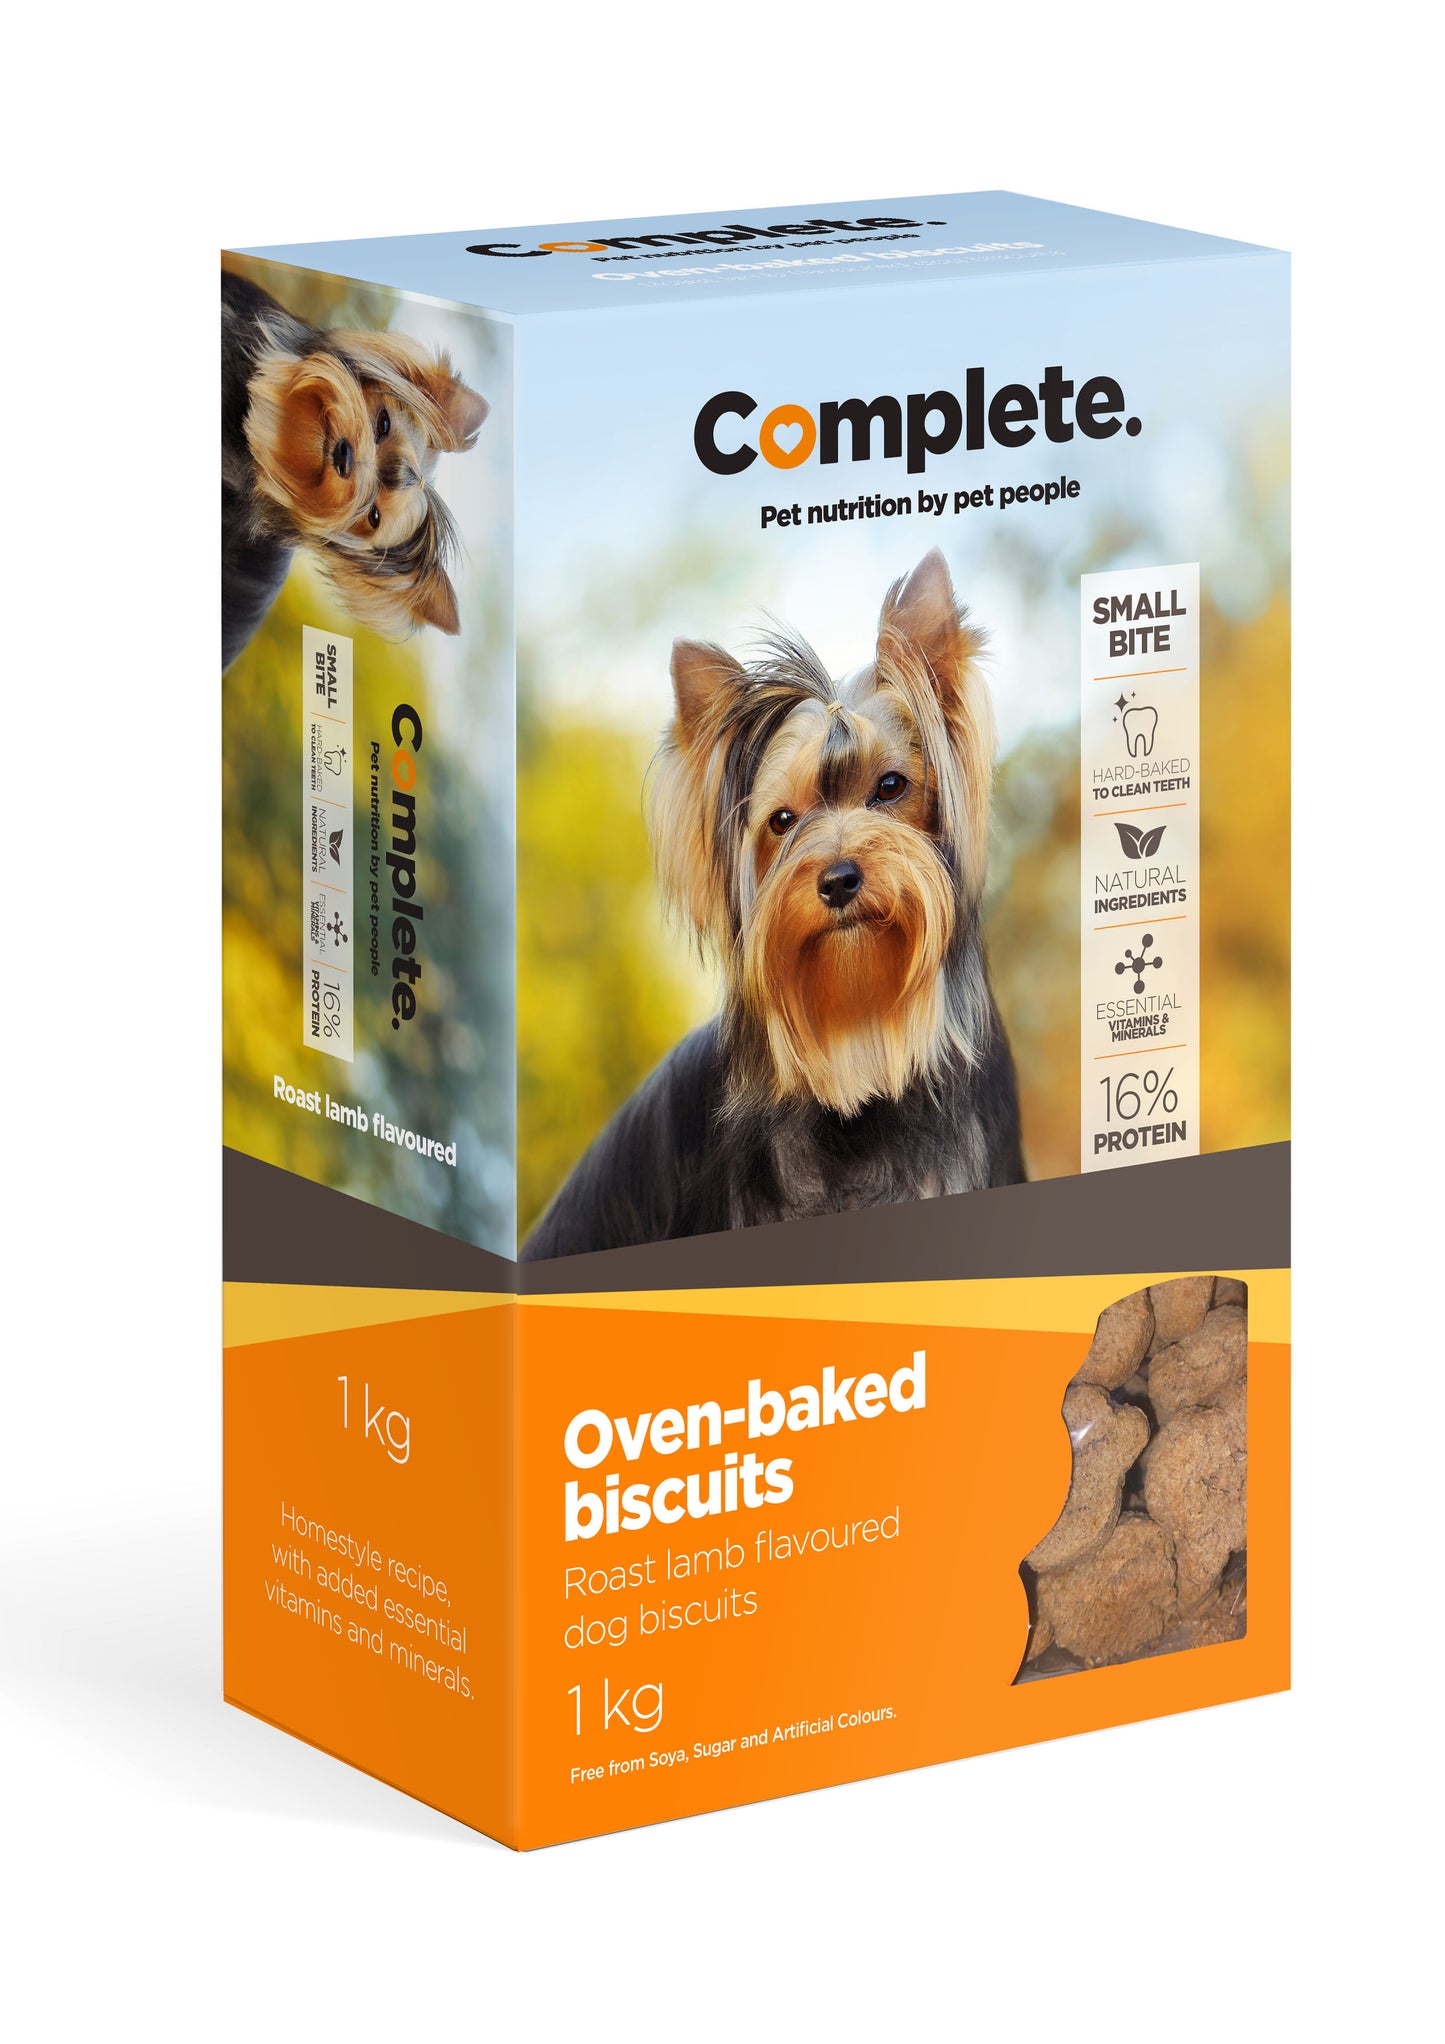 Complete dog Biscuits Product image2 from Pets Planet - South Africa’s No.1 ePet Store for premium pet products, online pet shopping, best pet store near me, Dog food, pet food, cat food, dog wet food, cat wet food, dog treats, dog snacks, pet snacks, pet treats, dog biscuits, dog bed, dog beds, dog beds on sale, washable dog bed, takealot dog bed, plush dog bed, pet bed, iremia dog bed, pet store Olivedale, pet store Bryanston, Pet Store Johannesburg, Complete Pet Nutrition, Complete pet nutrition dog food